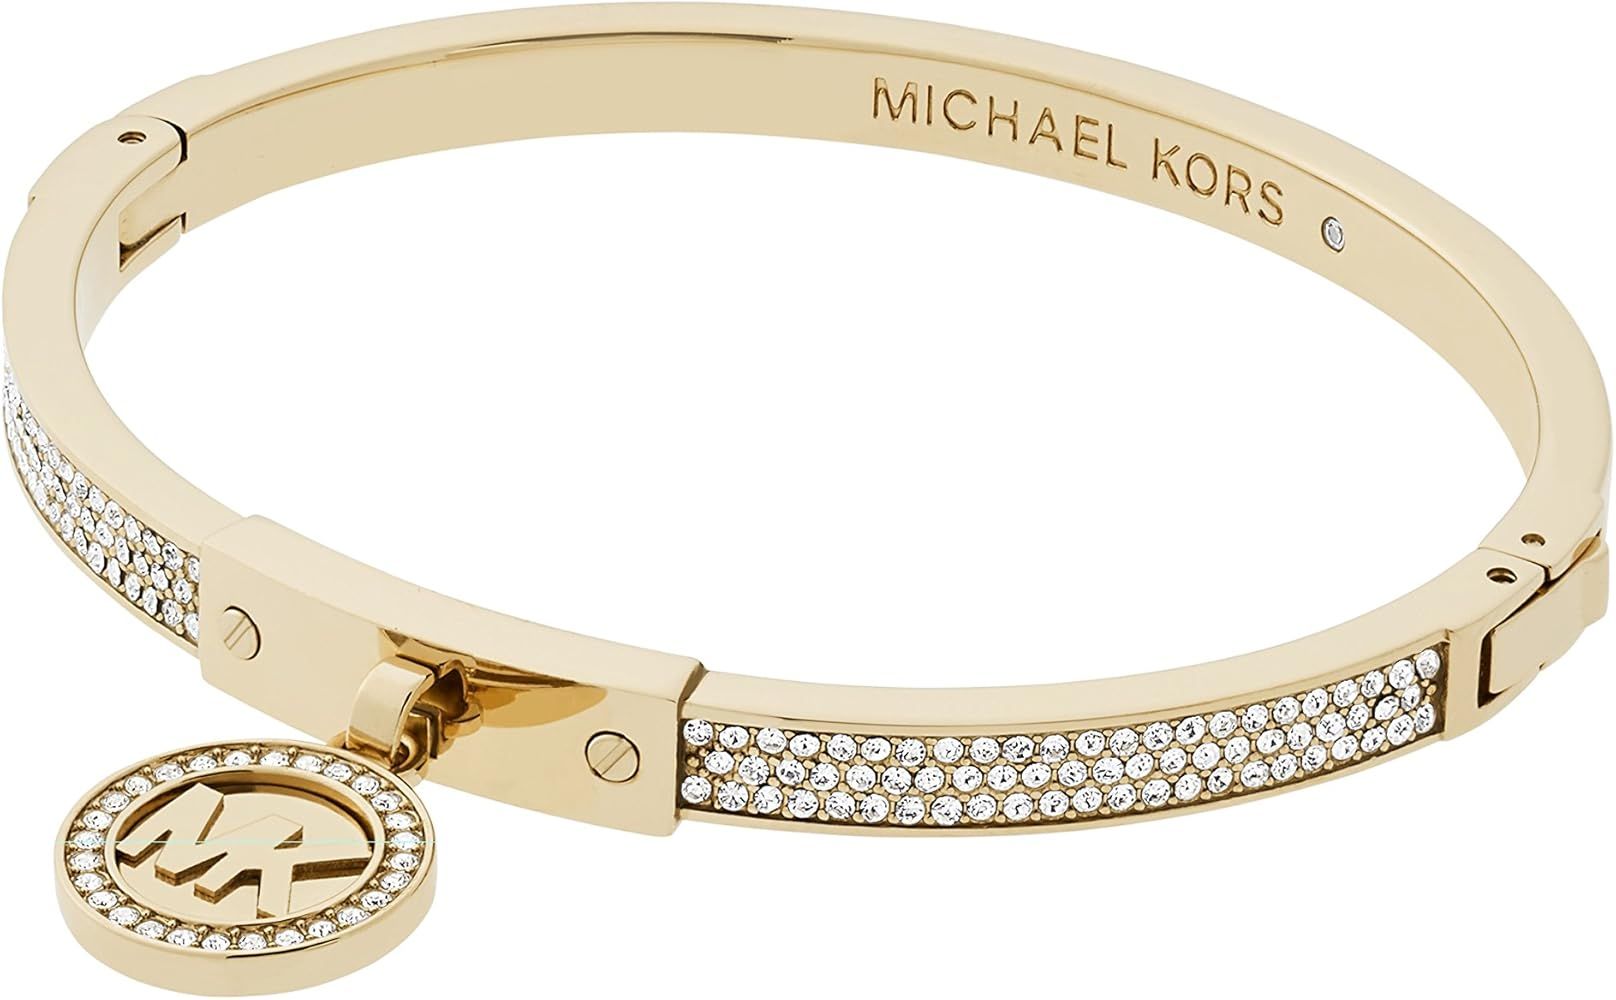 Michael Kors Women's Stainless Steel Bangle Bracelet with Crystal Accents | Amazon (US)